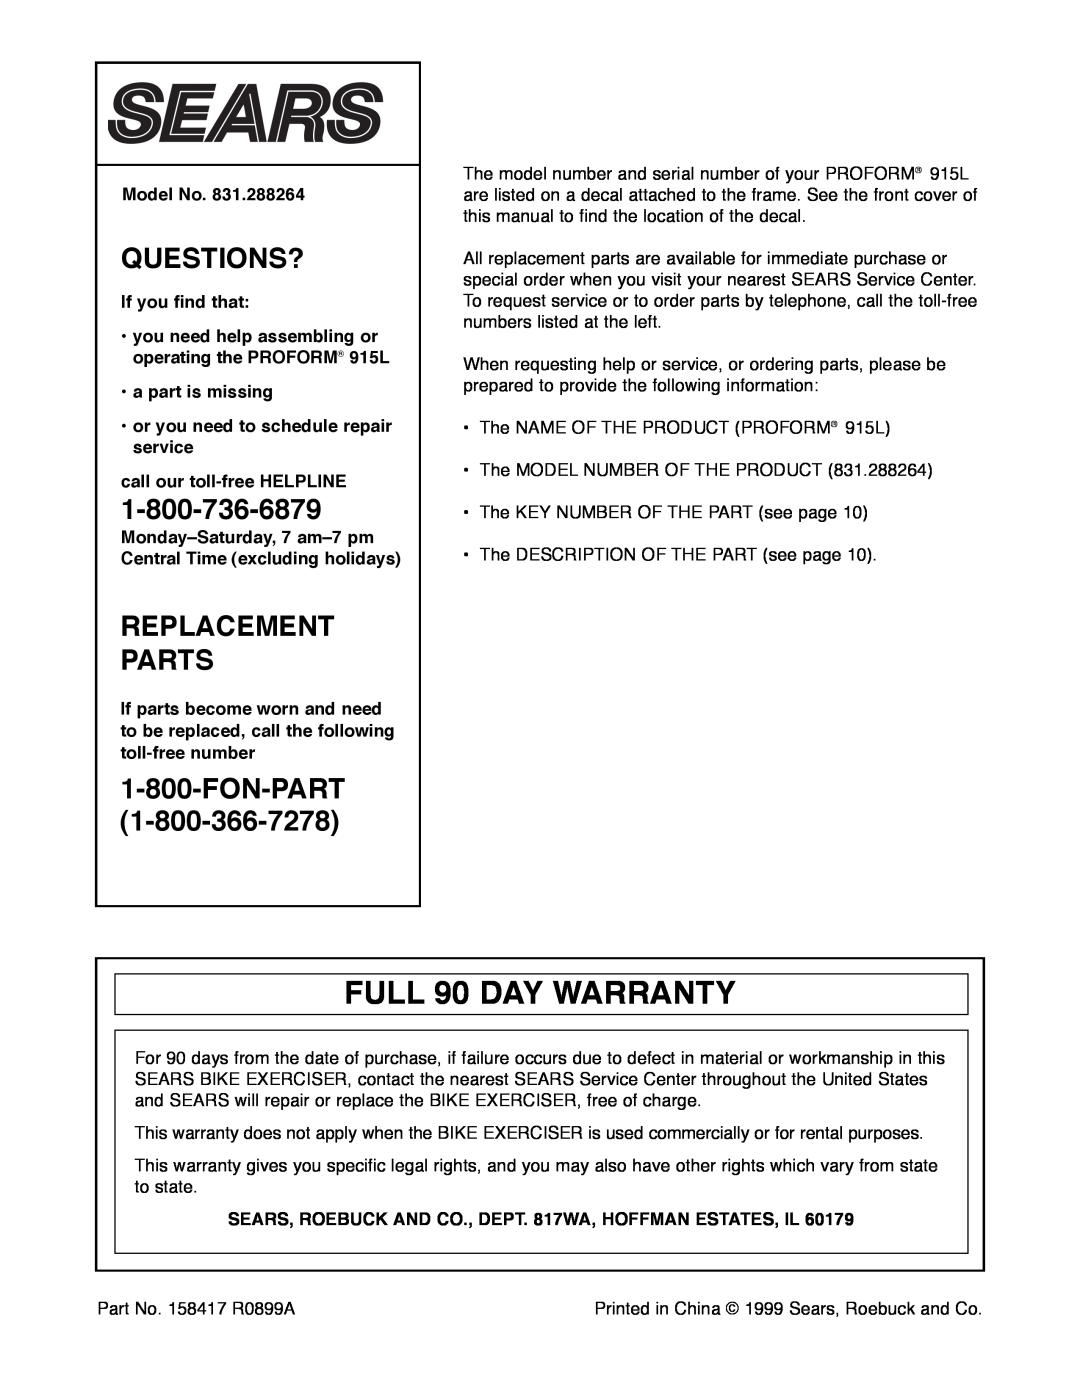 Sears 831.288264 manual FULL 90 DAY WARRANTY, If you find that, ¥ you need help assembling or operating the PROFORM¨ 915L 